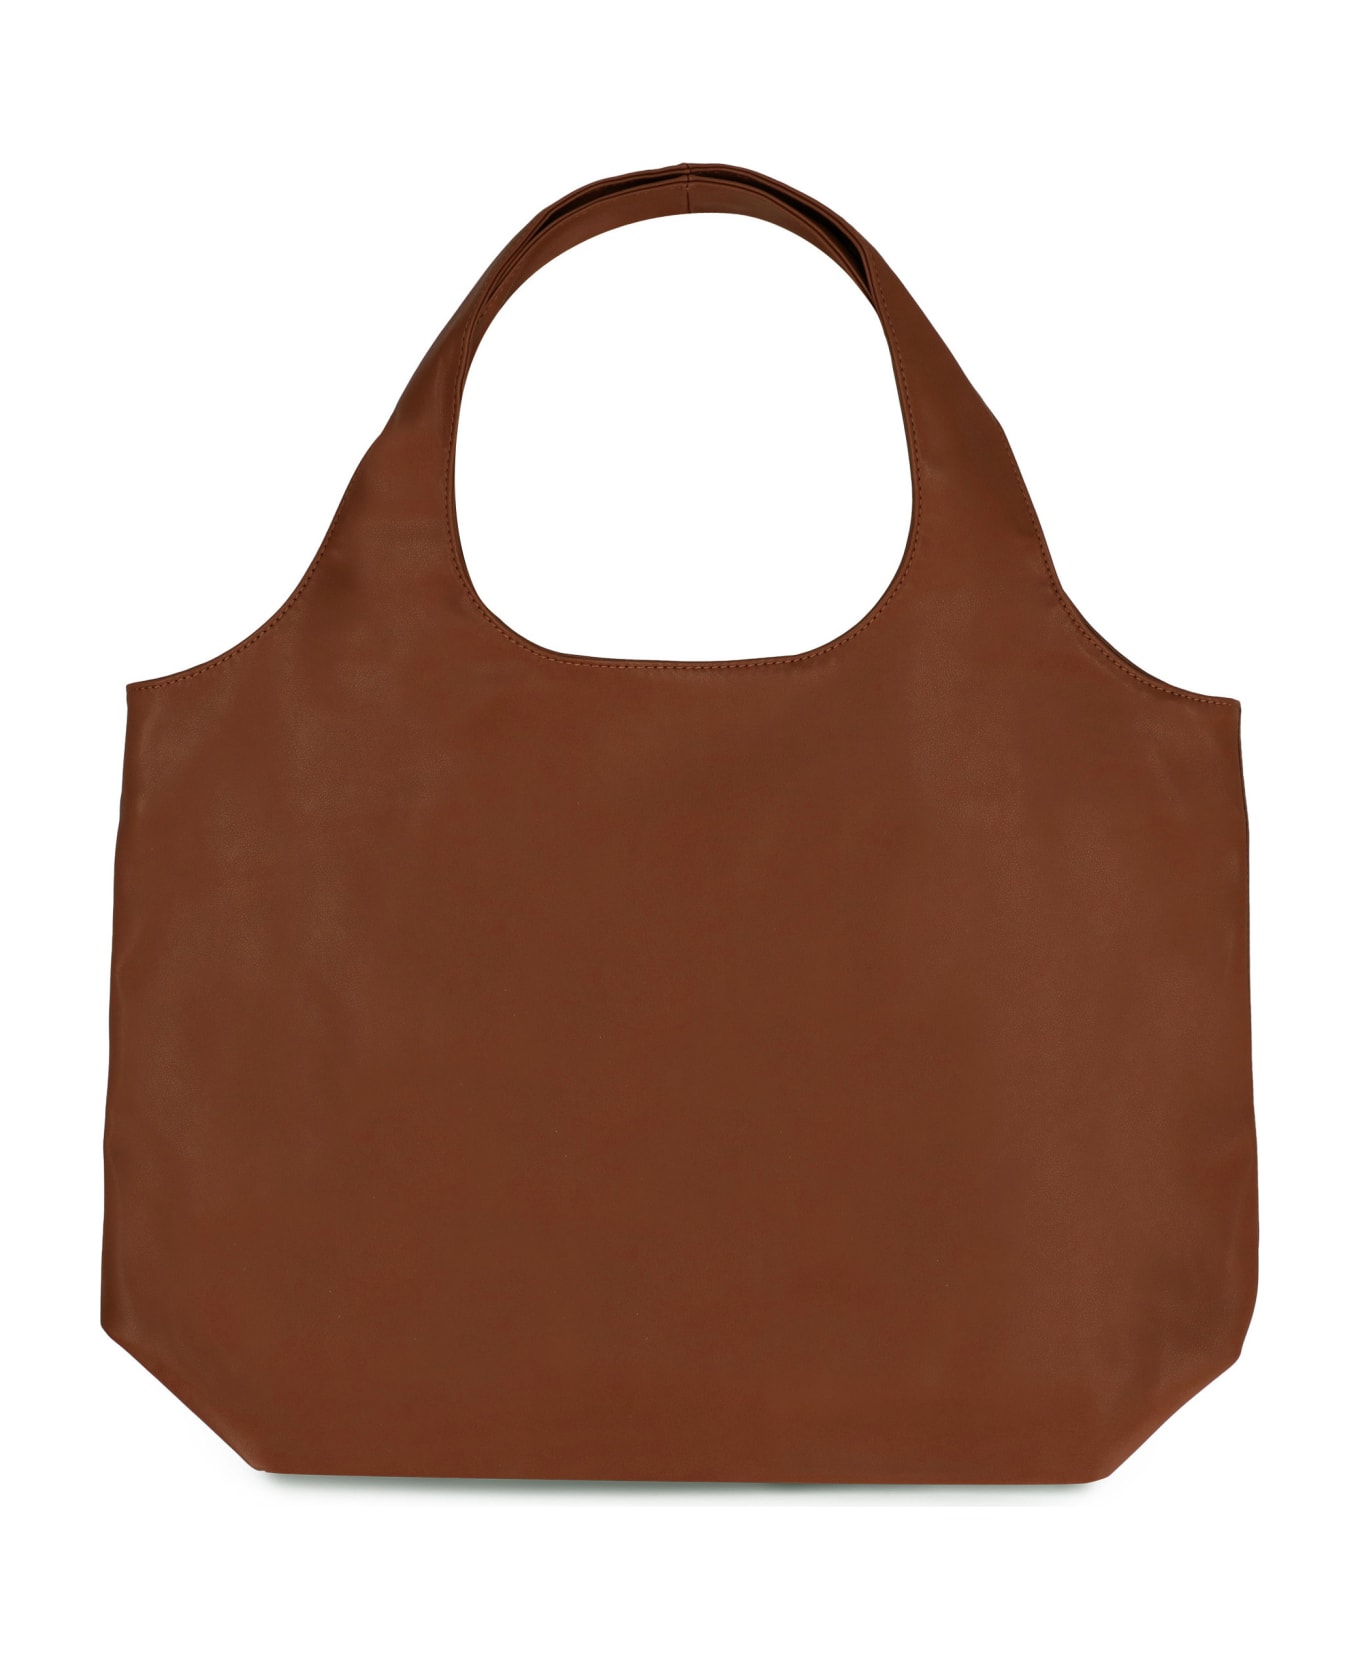 A.P.C. Vegan Leather Tote - brown トートバッグ